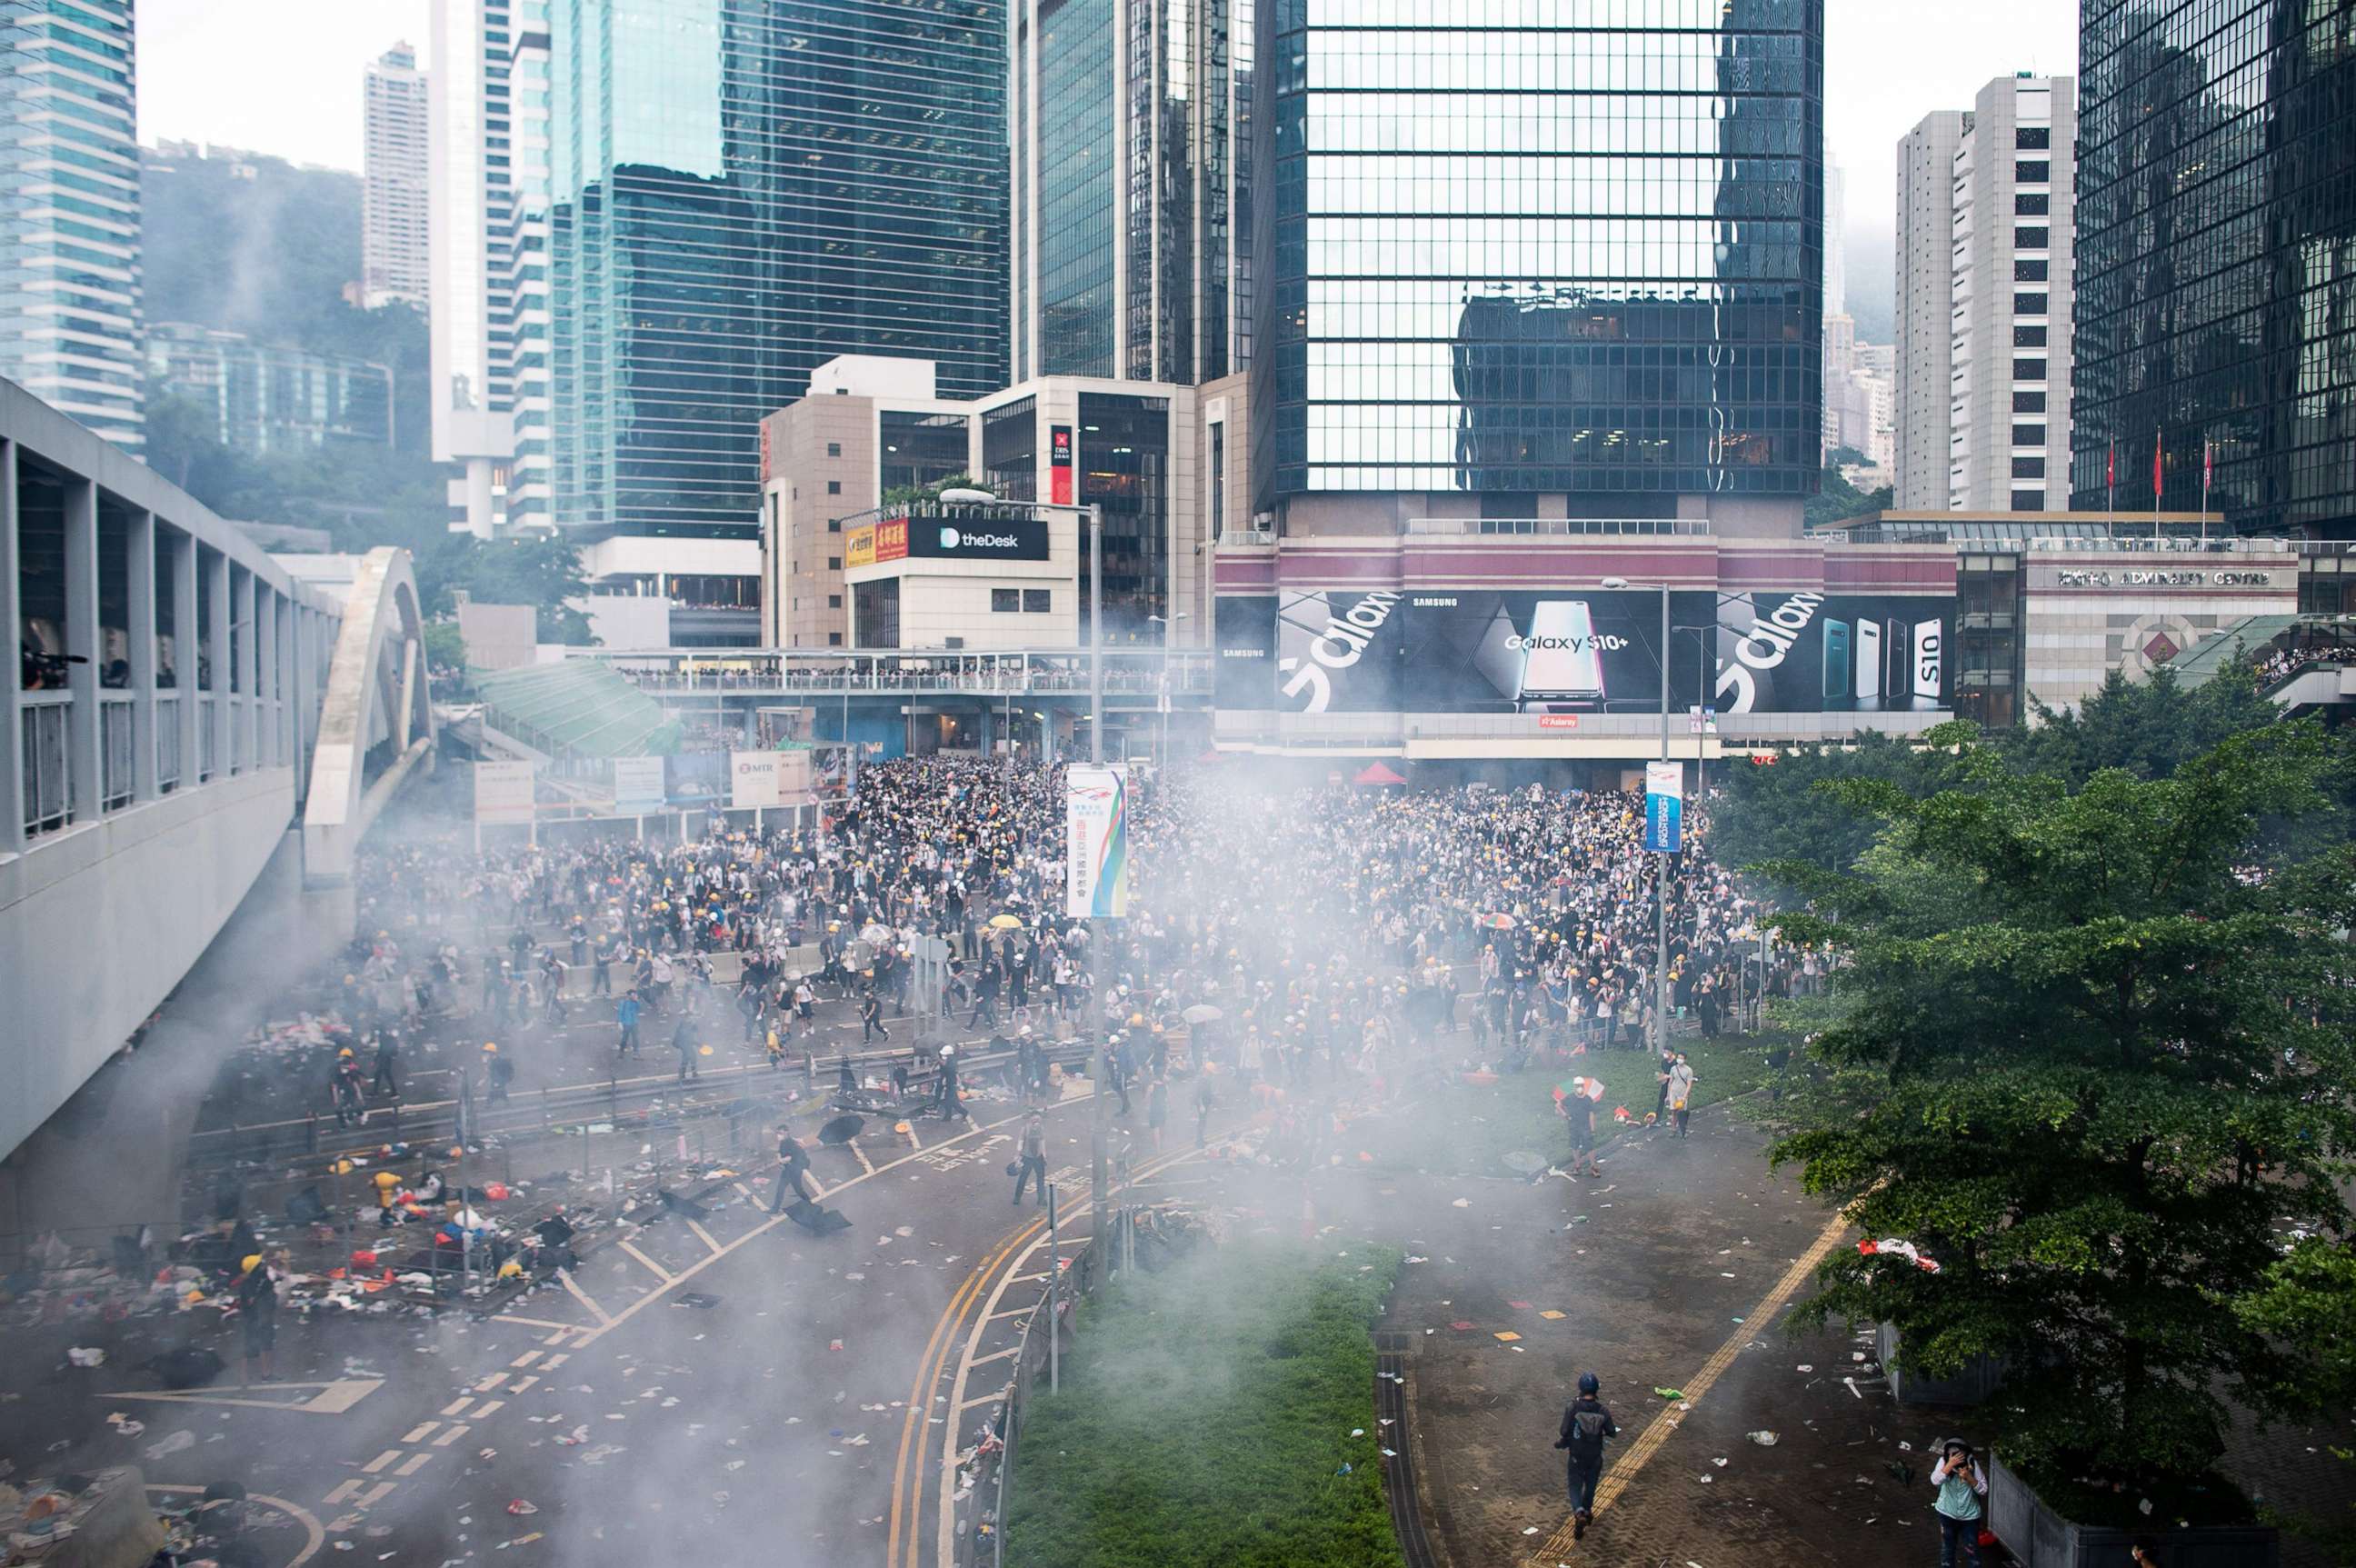 PHOTO: Tear gas is seen outside the Legislative Council during violent clashes between police and protesters rallying against a controversial extradition law proposal outside the government headquarters in Hong Kong, June 12, 2019.